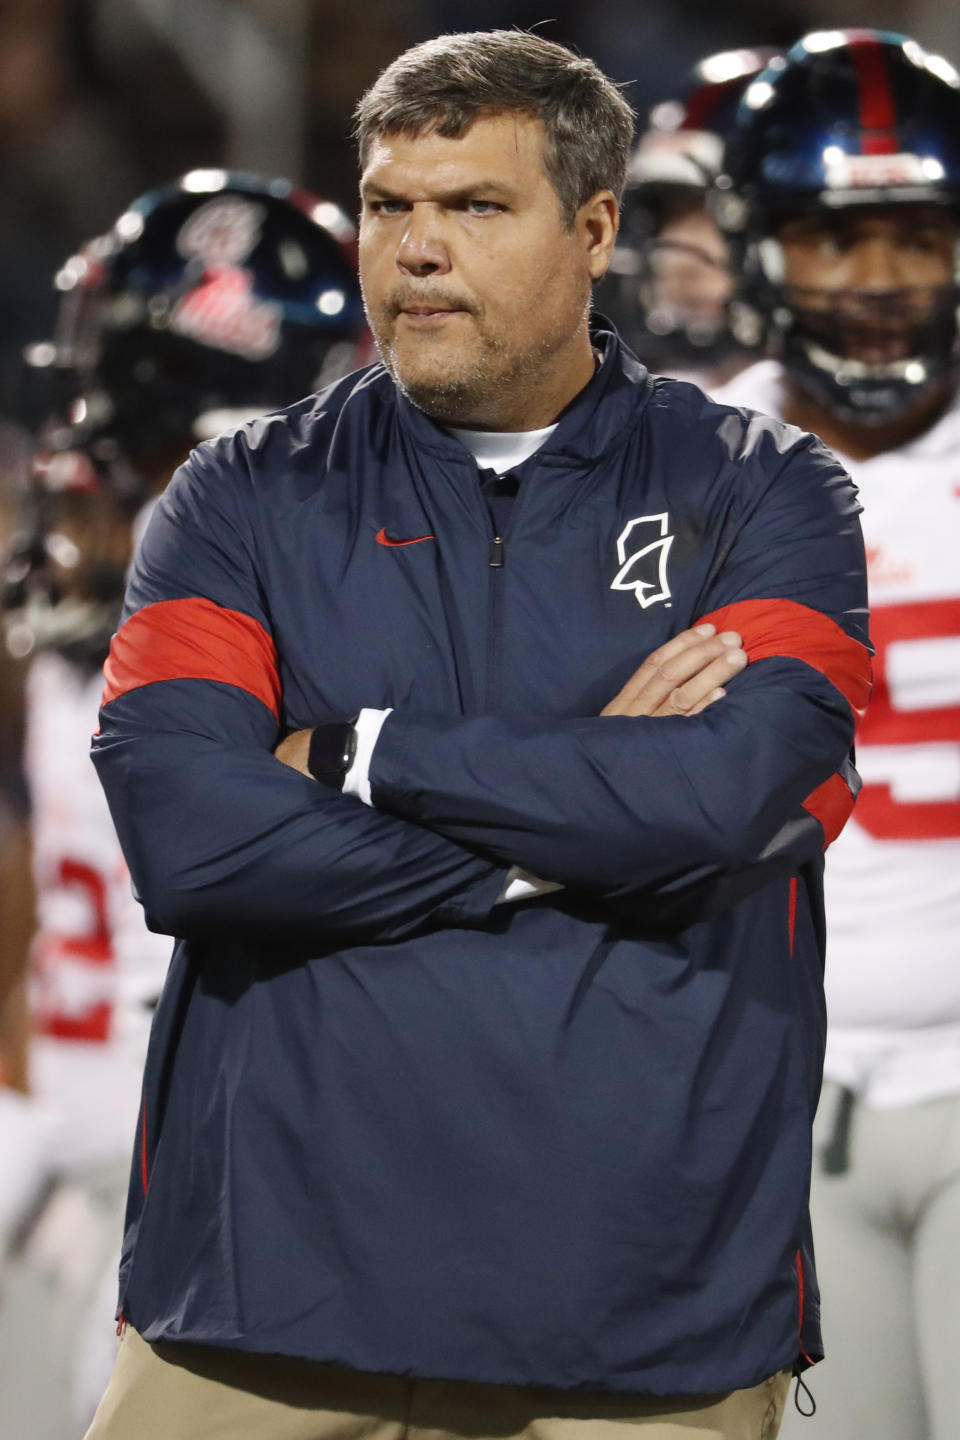 In this Nov. 28, 2019 photo, Mississippi head coach Matt Luke watches his players warm up prior to an NCAA college football game against Mississippi State, in Starkville, Miss. Mississippi has fired Luke, three days after his third non-winning season ended with an excruciating rivalry game loss. Athletic director Keith Carter said Sunday, Dec. 1, 2019 the decision to change coaches was made after evaluating the trajectory of the program and not seeing enough “momentum on the field. (AP Photo/Rogelio V. Solis)